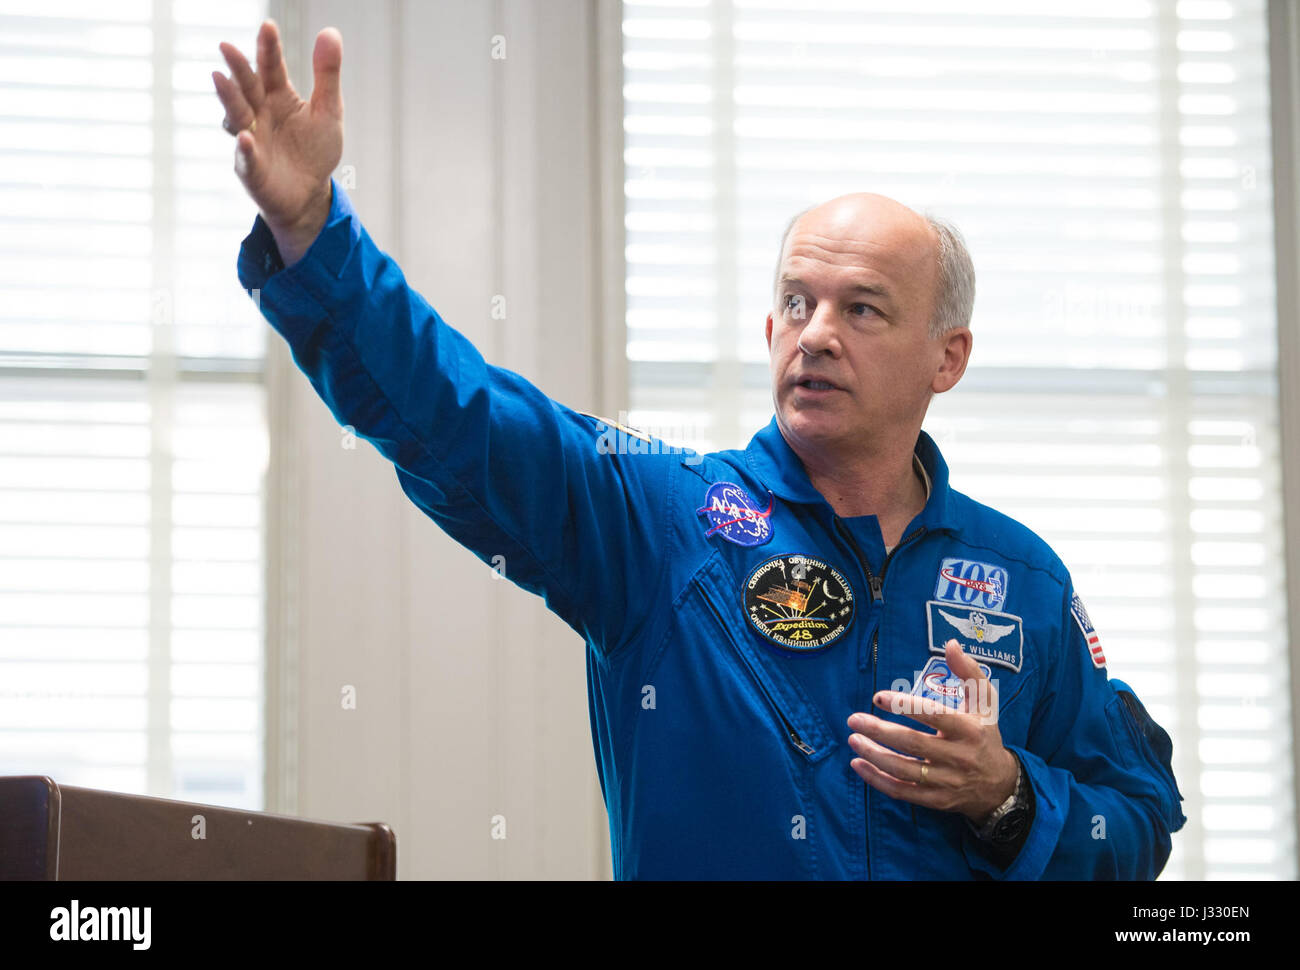 NASA Astronaut Jeff Williams speaks about his time onboard the International Space Station during Expeditions 47 and 48 with leadership of the National Park Service Thursday, March 23, 2017 at the U.S. Department of the Interior in Washington. Jeff Williams completed his fourth mission when he landed in a remote area near the town of Zhezkazgan, Kazakhstan in September 2016, breaking the record for most days in space with a total of 534 days. Photo Credit: (NASA/Aubrey Gemignani) Stock Photo